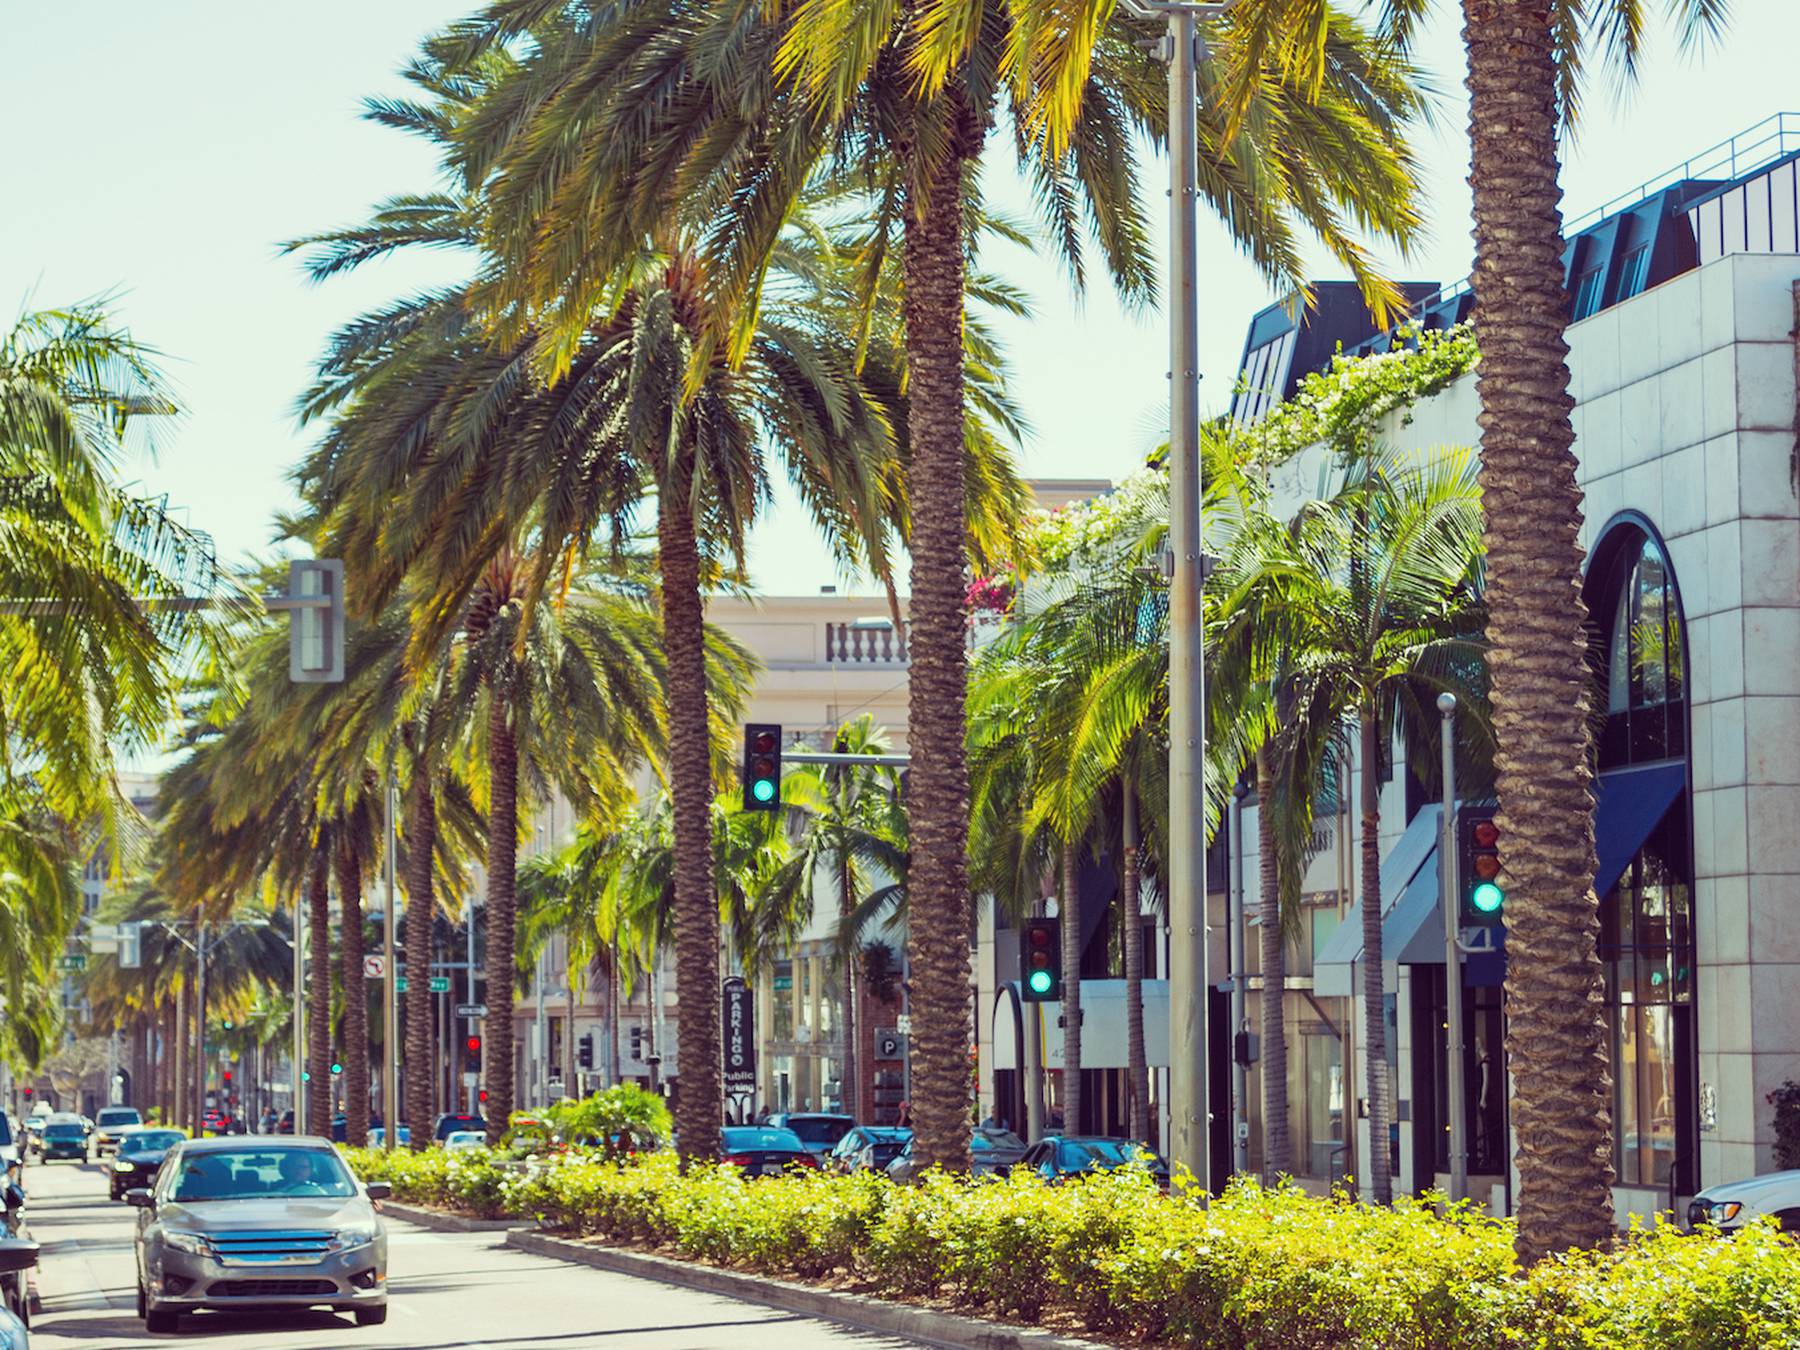 With Dior, Louis Vuitton and Cheval Blanc, Rodeo Drive begins its  transformation